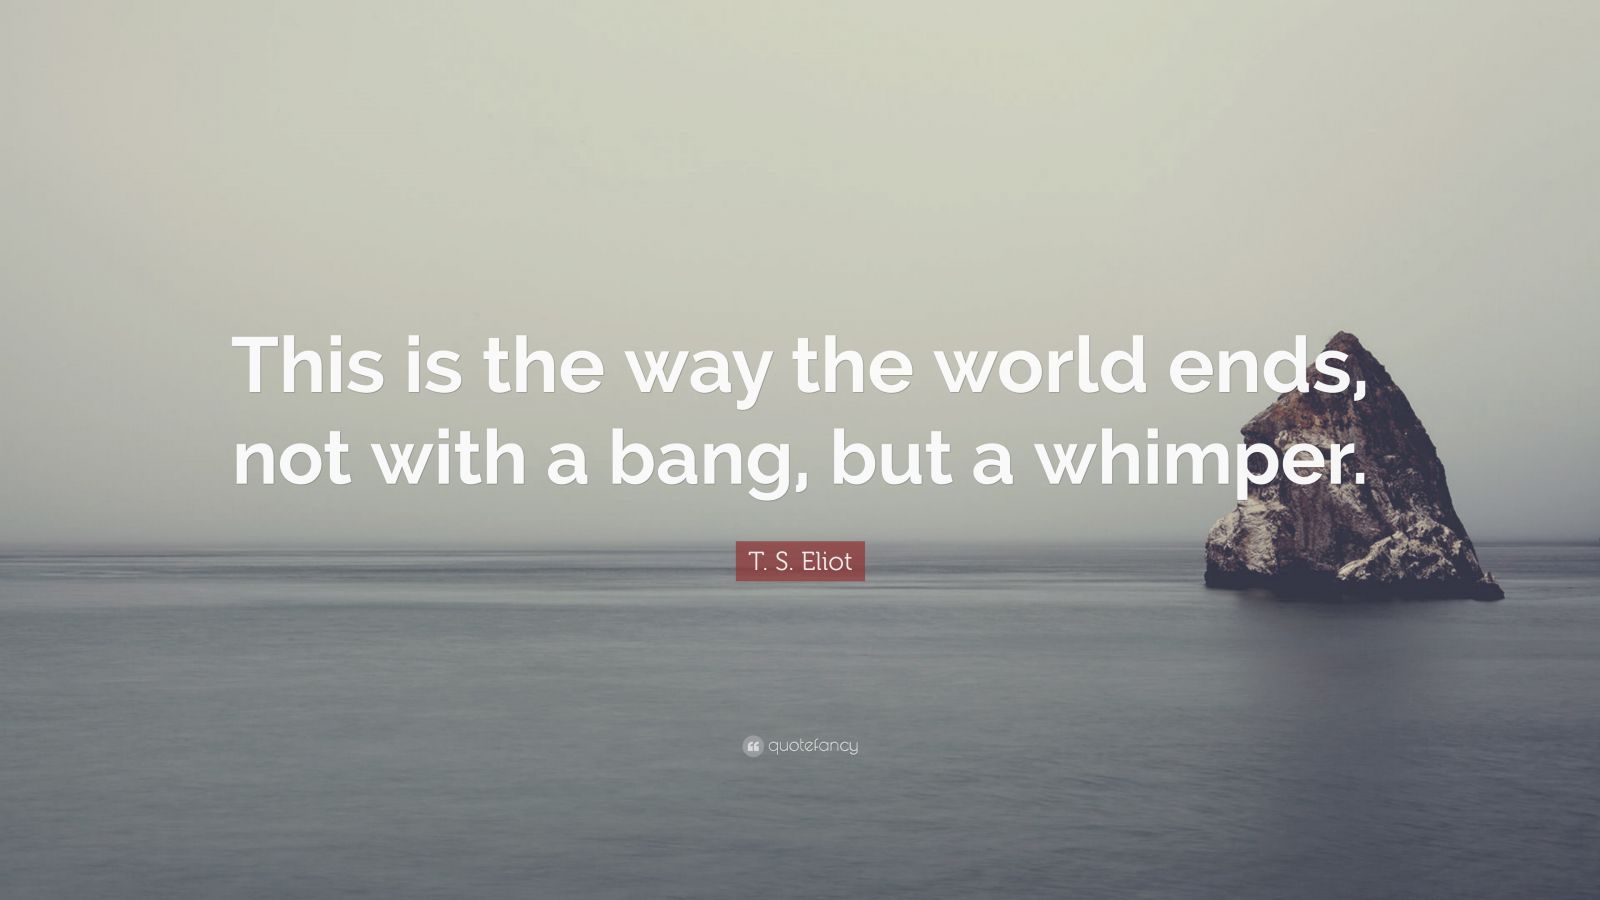 T S Eliot Quote “this Is The Way The World Ends Not With A Bang But A Whimper” 12 9639